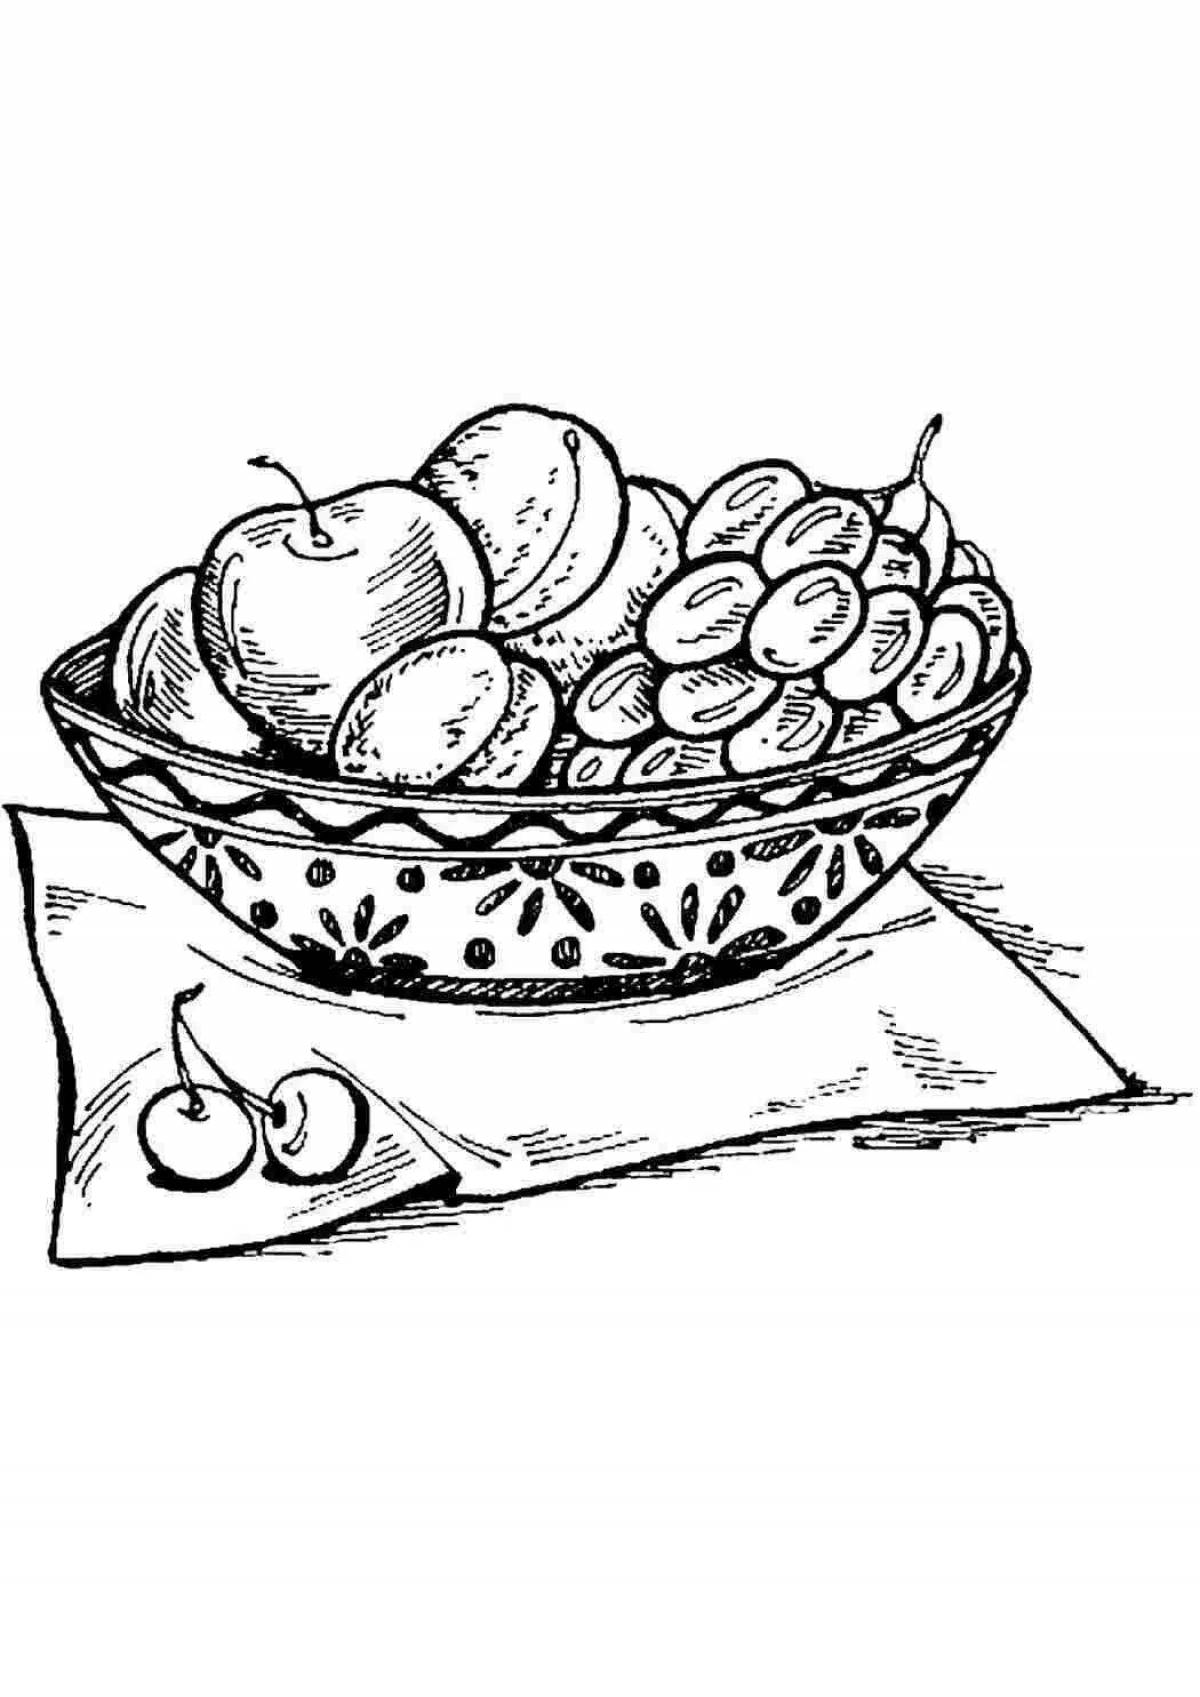 Adorable fruit plate coloring book for kids